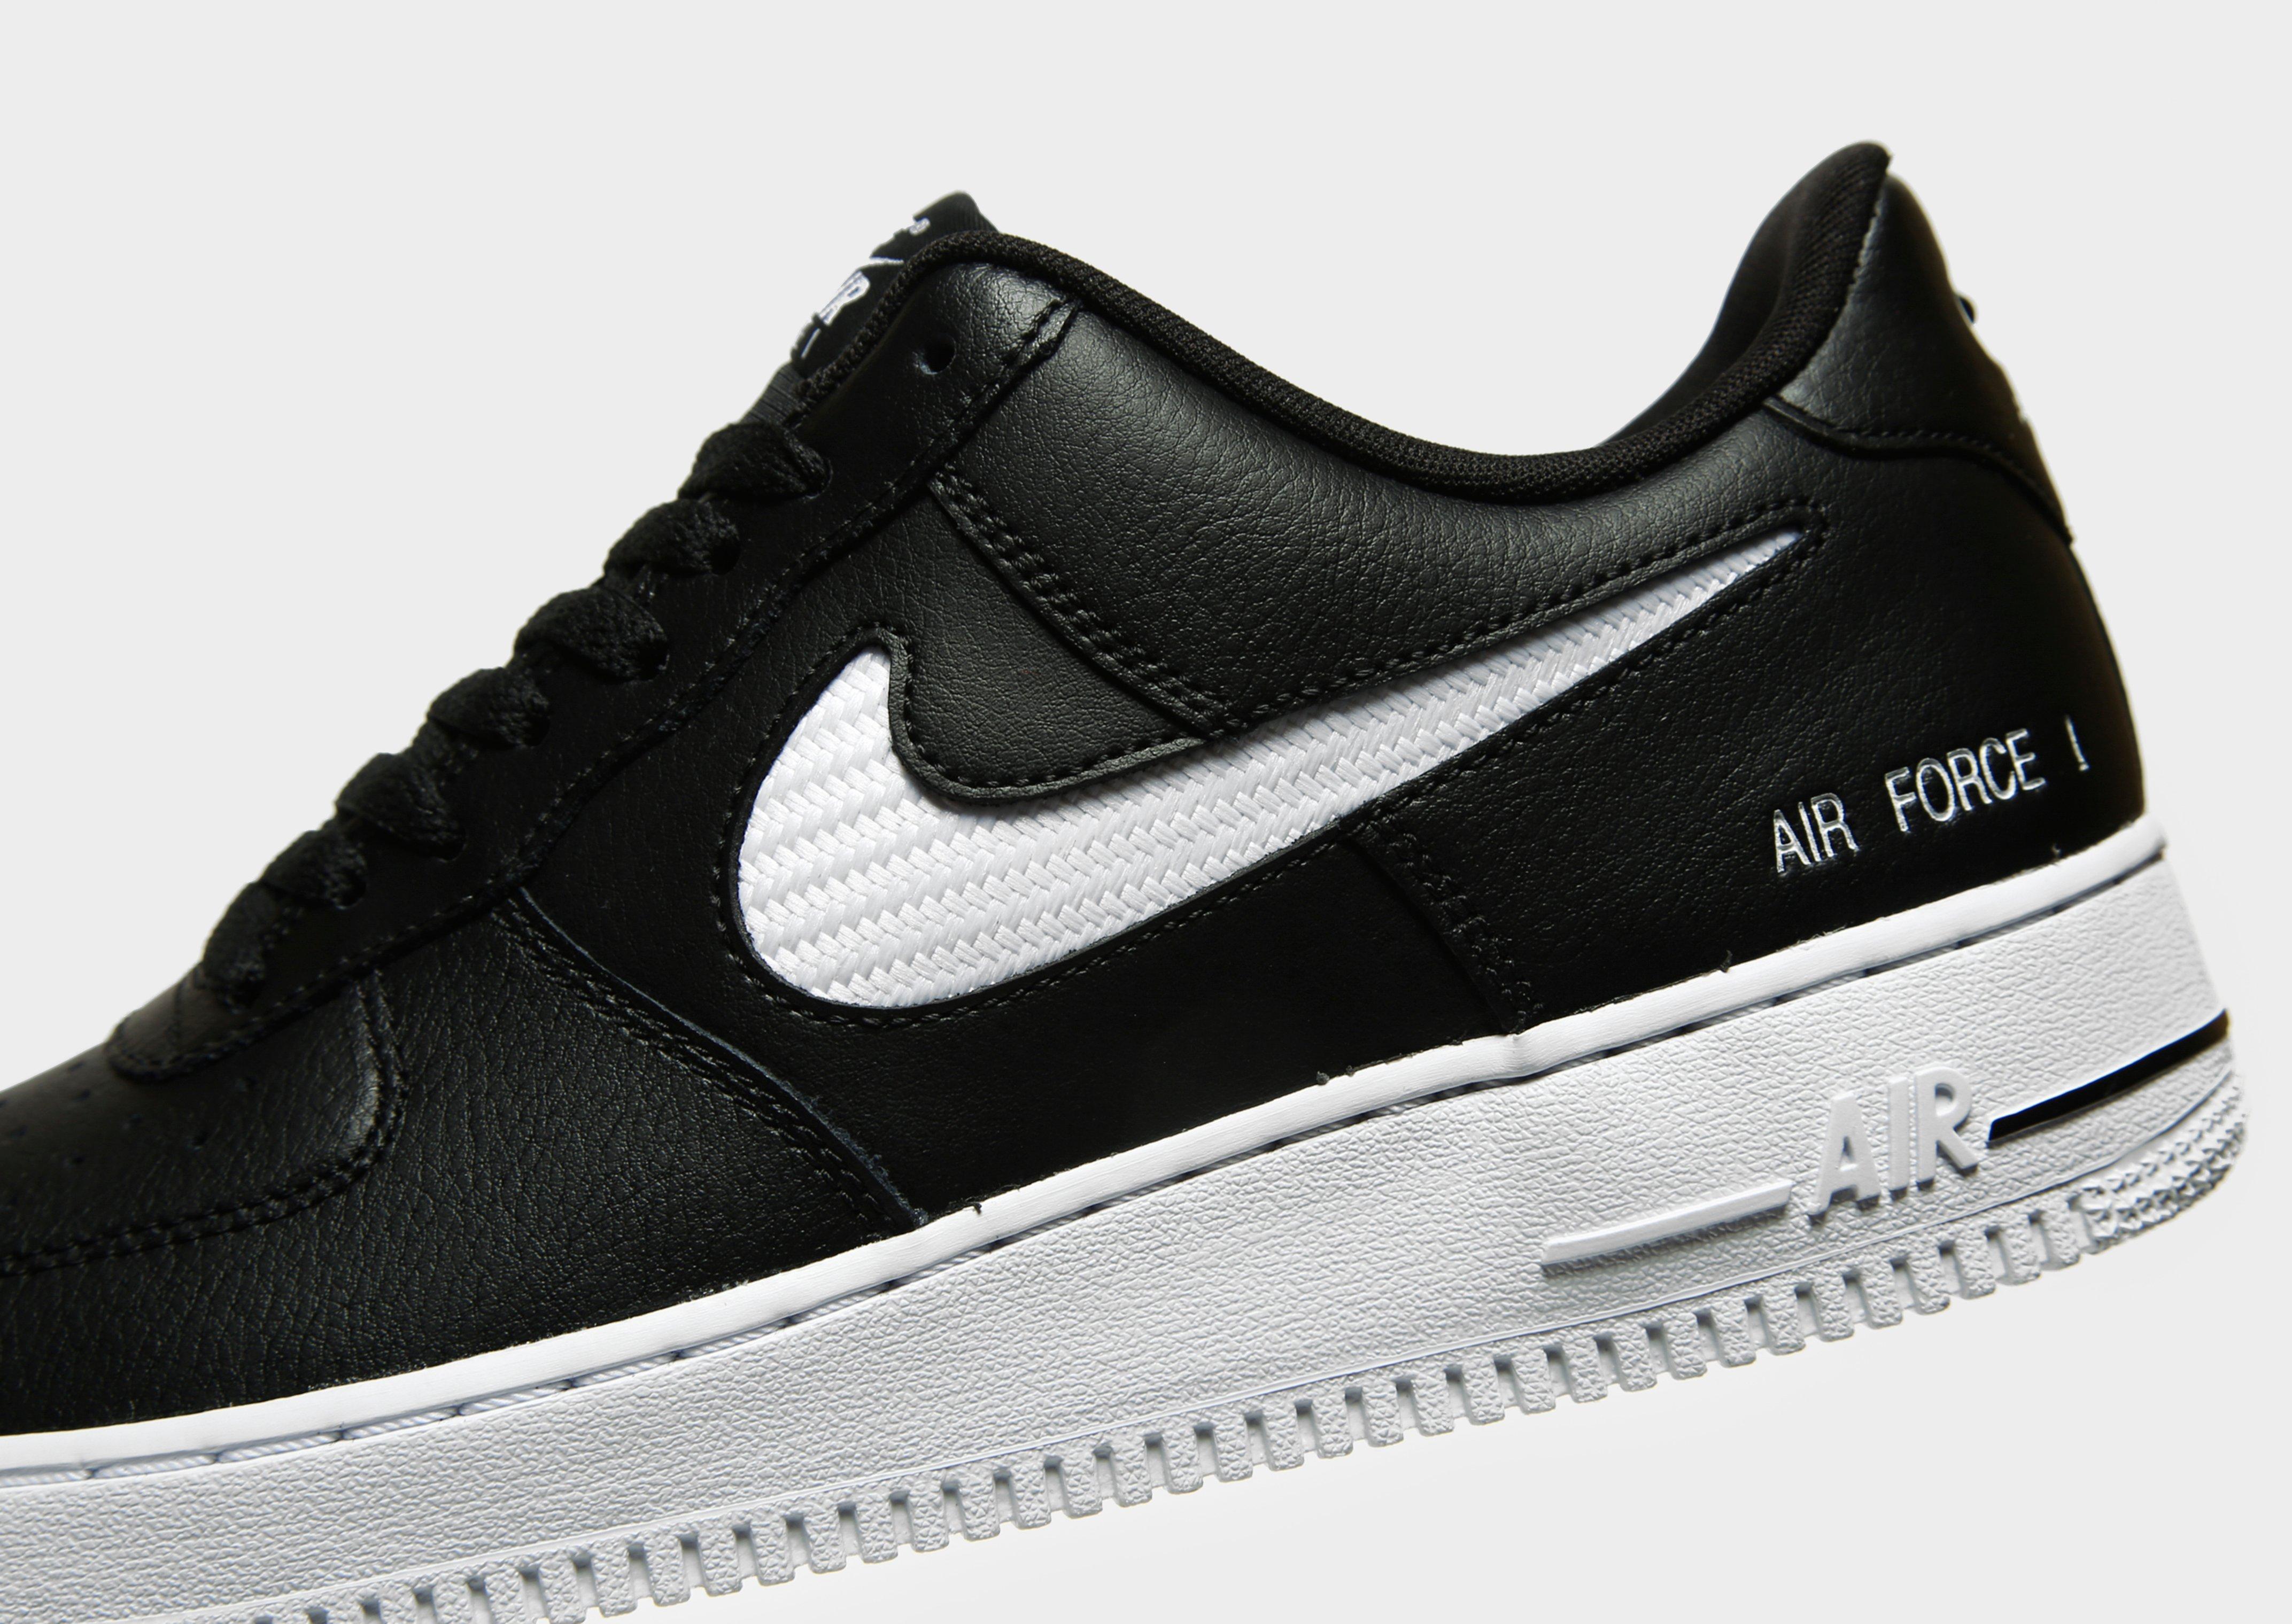 Acquista Nike Air Force 1 Low Mesh in Nero